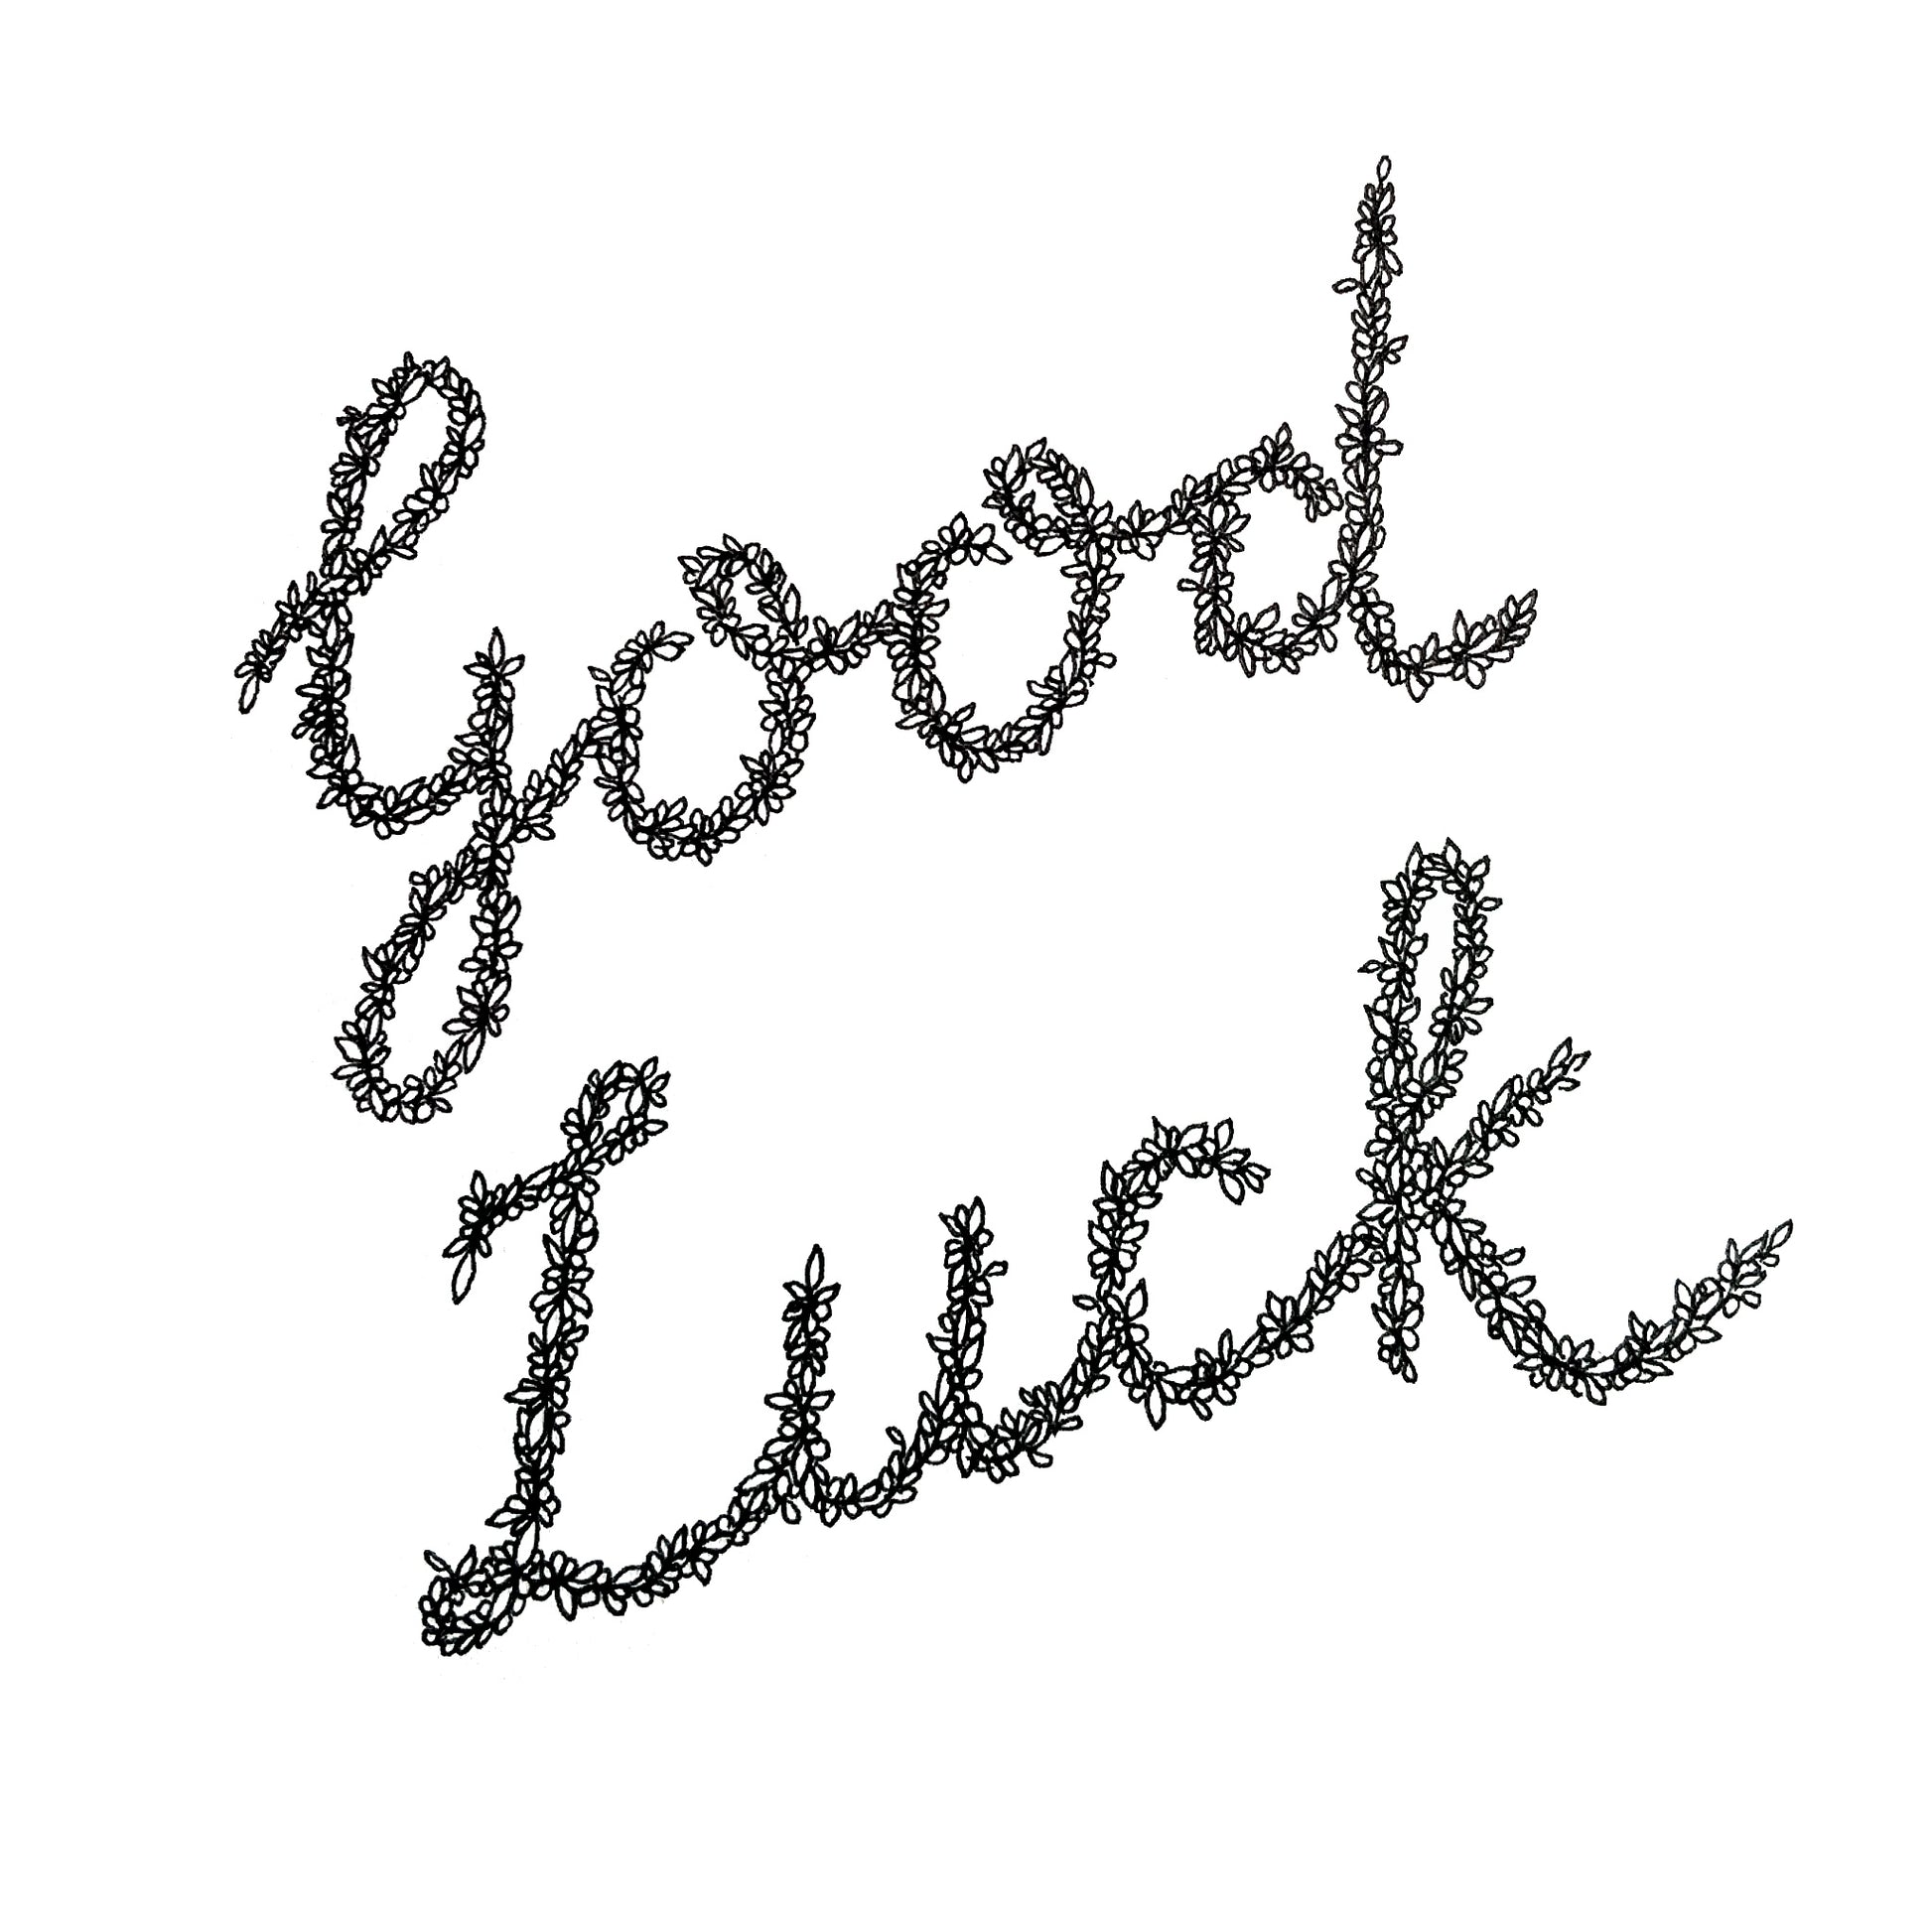 Image shows plain white background illustration of GOOD LUCK card. image is entirely black and white. 